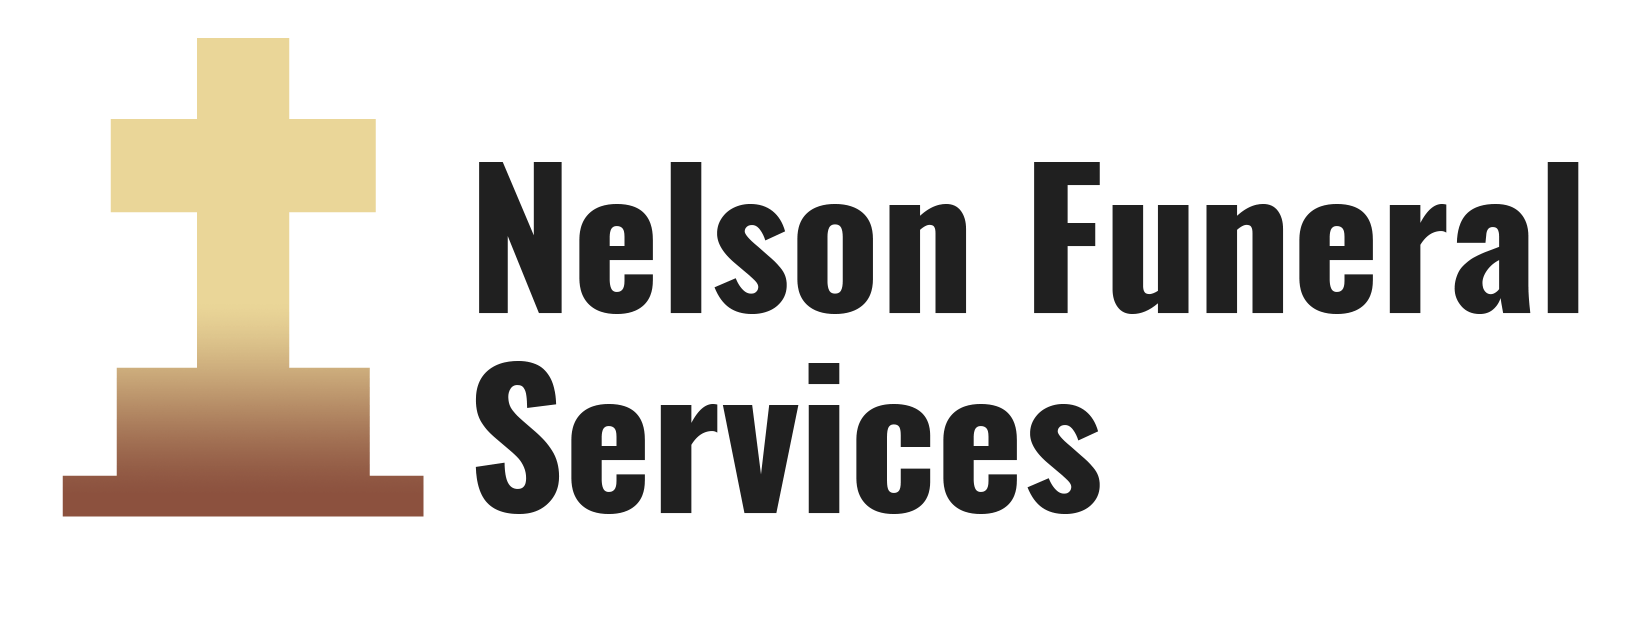 Nelson Funeral Services